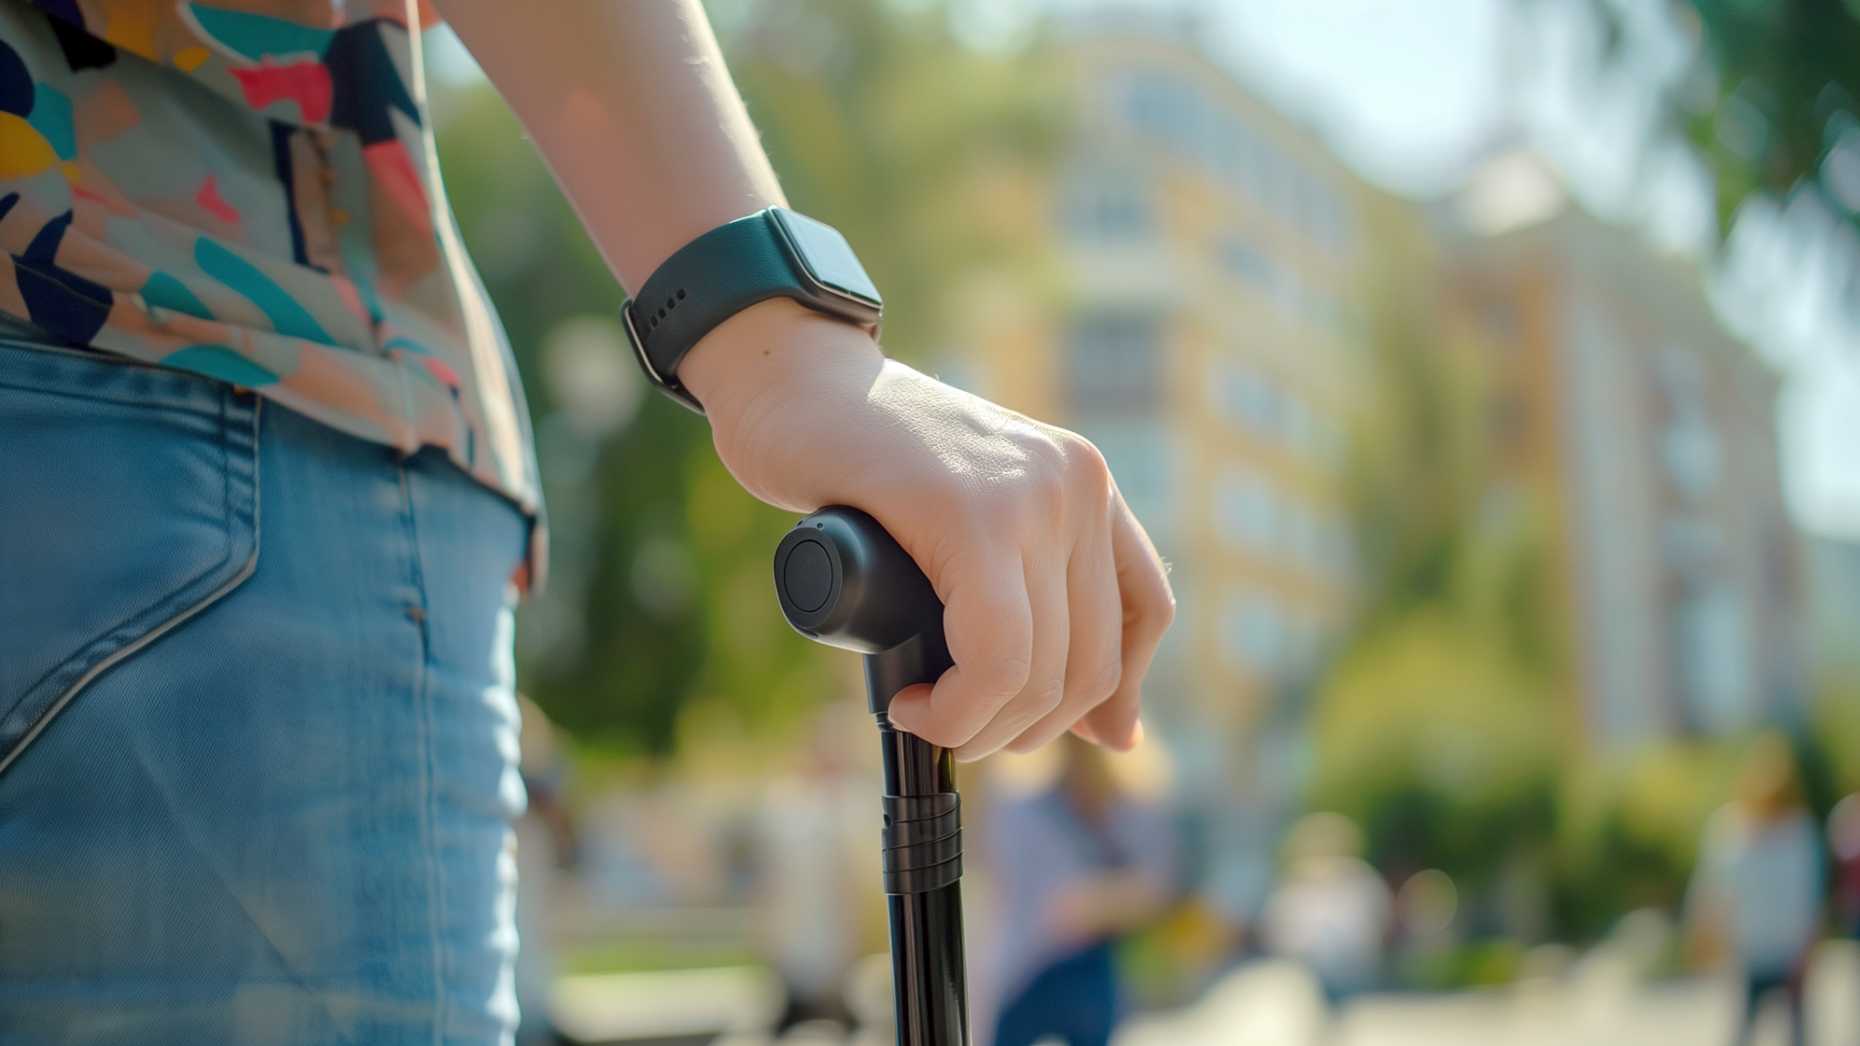 A person's hand is visible, wearing a smartwatch and holding a walking stick.